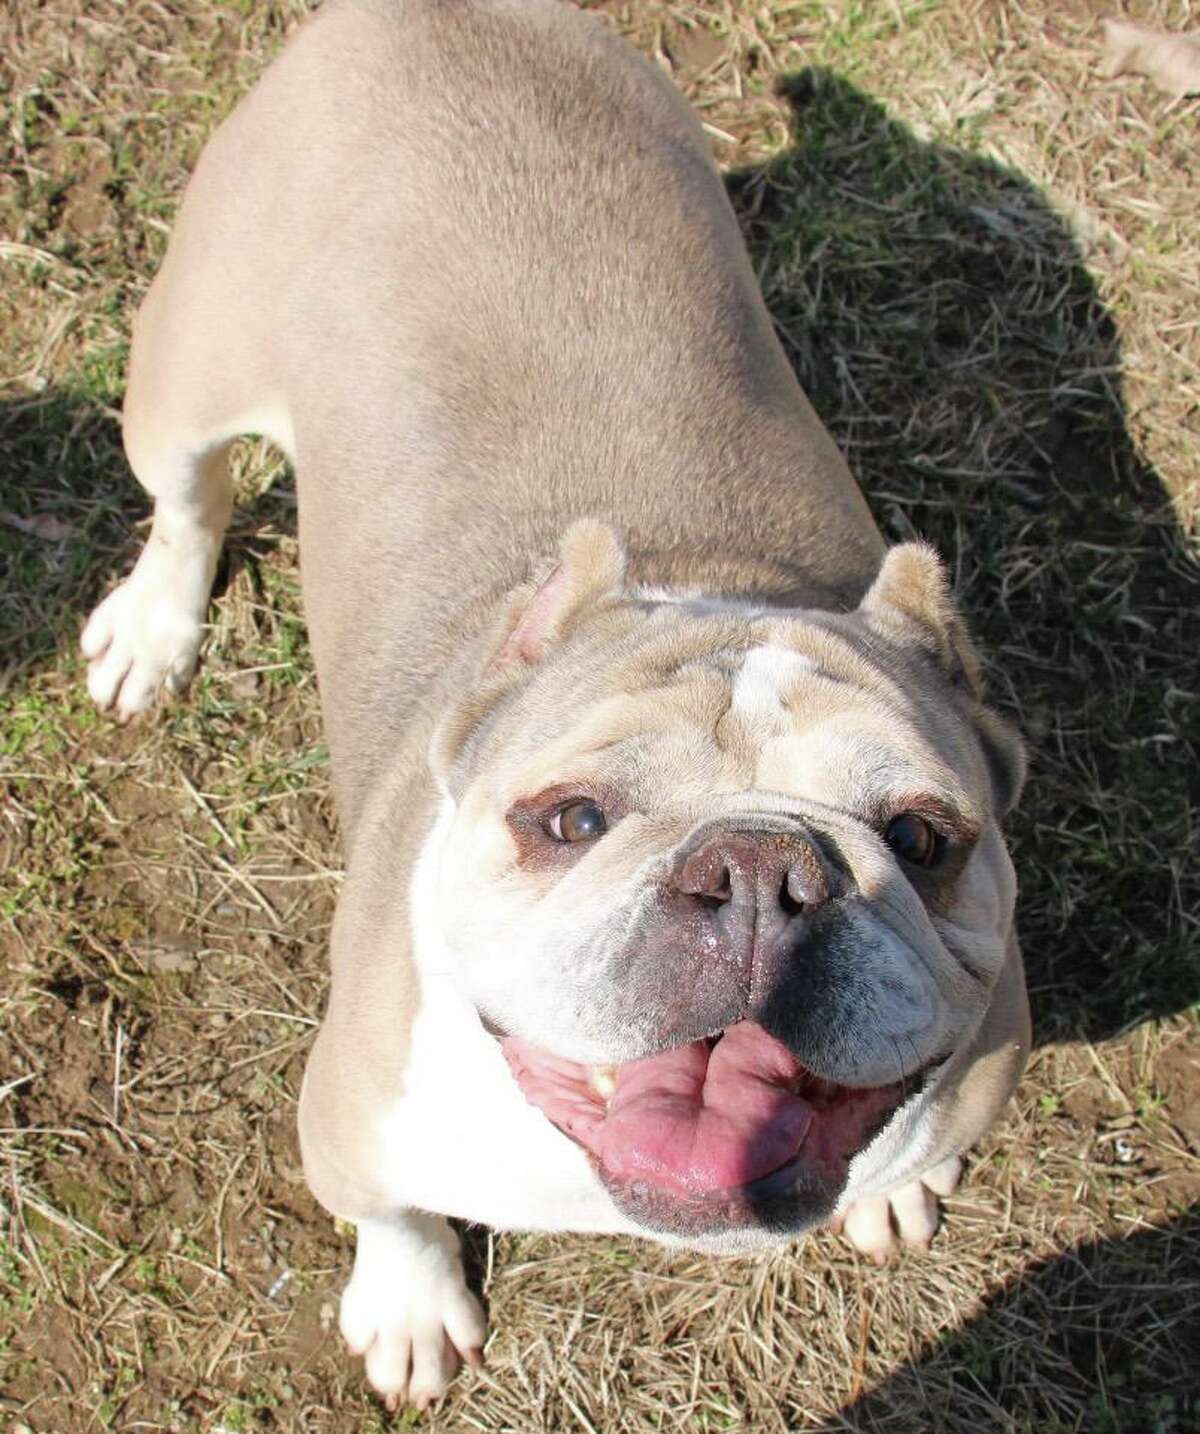 Bulldog Mary was tossed out of a truck on busy Racebrook Road and left for dead after a botched makeshift surgery. Now she's looking for a forever hme.